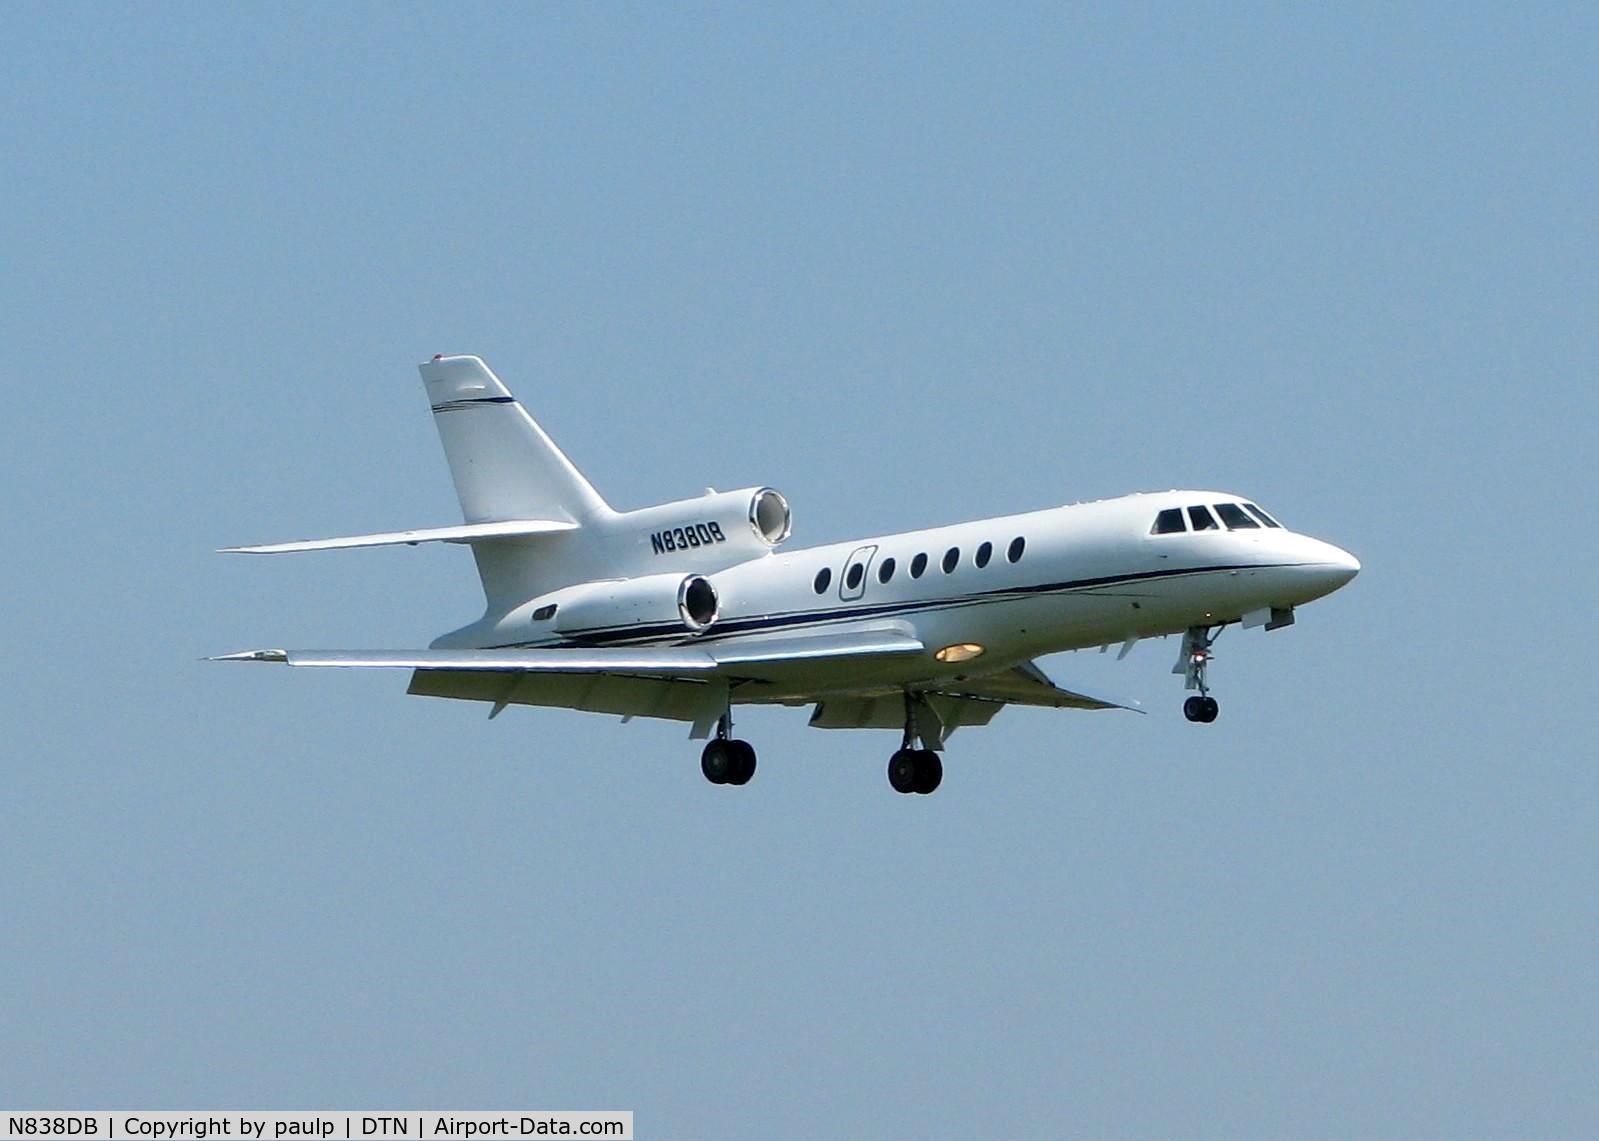 N838DB, 1997 Dassault Falcon 50 C/N 265, Landing on 32 at Shreveport's Downtown Airport.